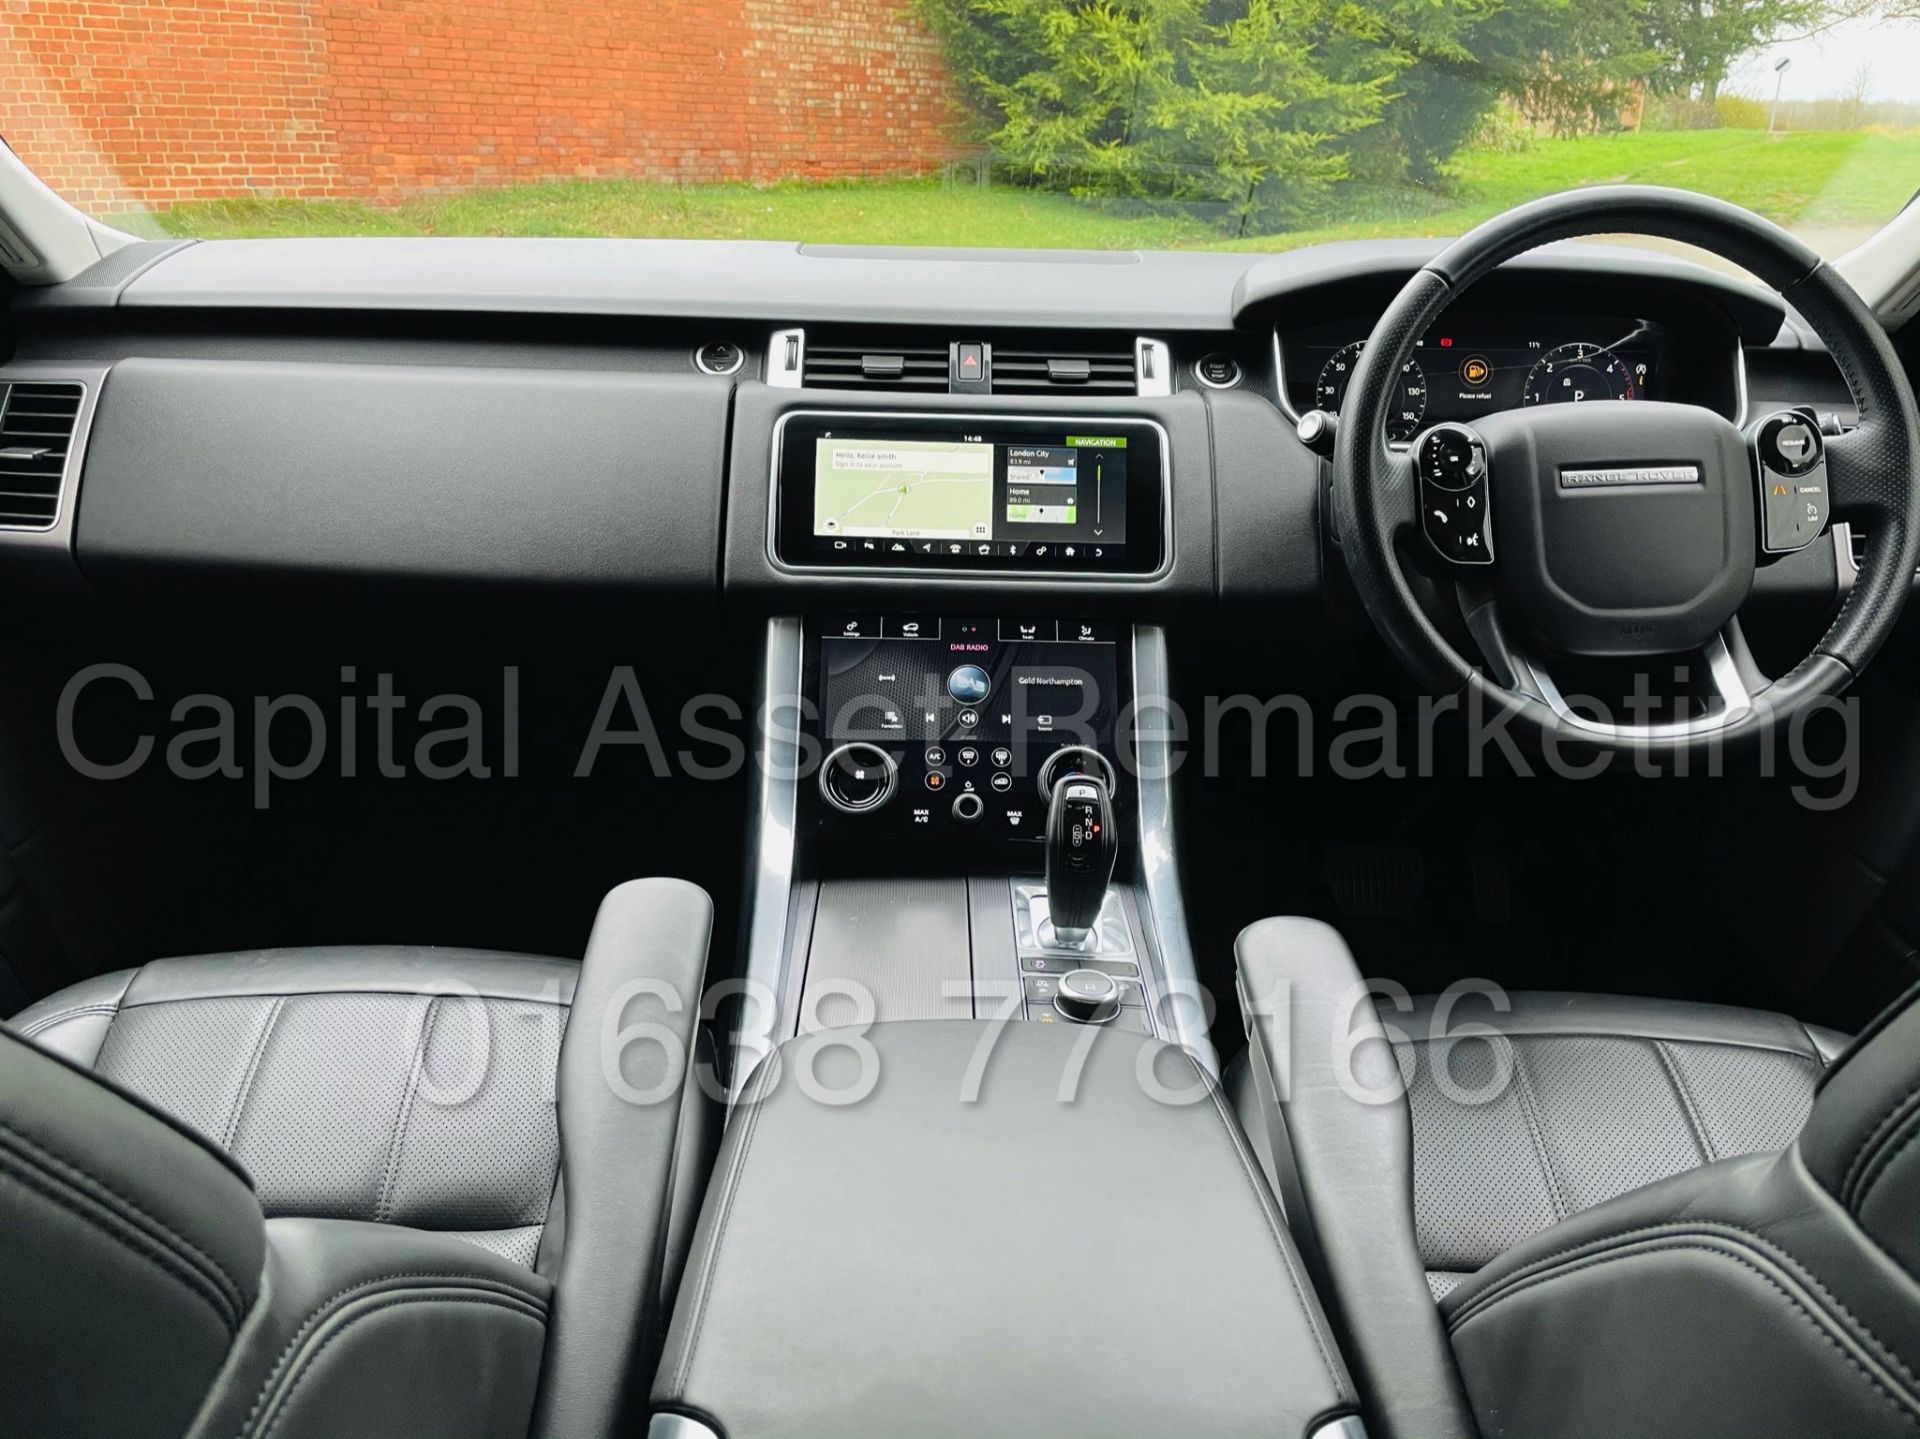 RANGE ROVER SPORT *HSE EDITION* SUV (2019 MODEL) '3.0 SDV6 - 306 BHP - 8 SPEED AUTO' *FULLY LOADED* - Image 33 of 56